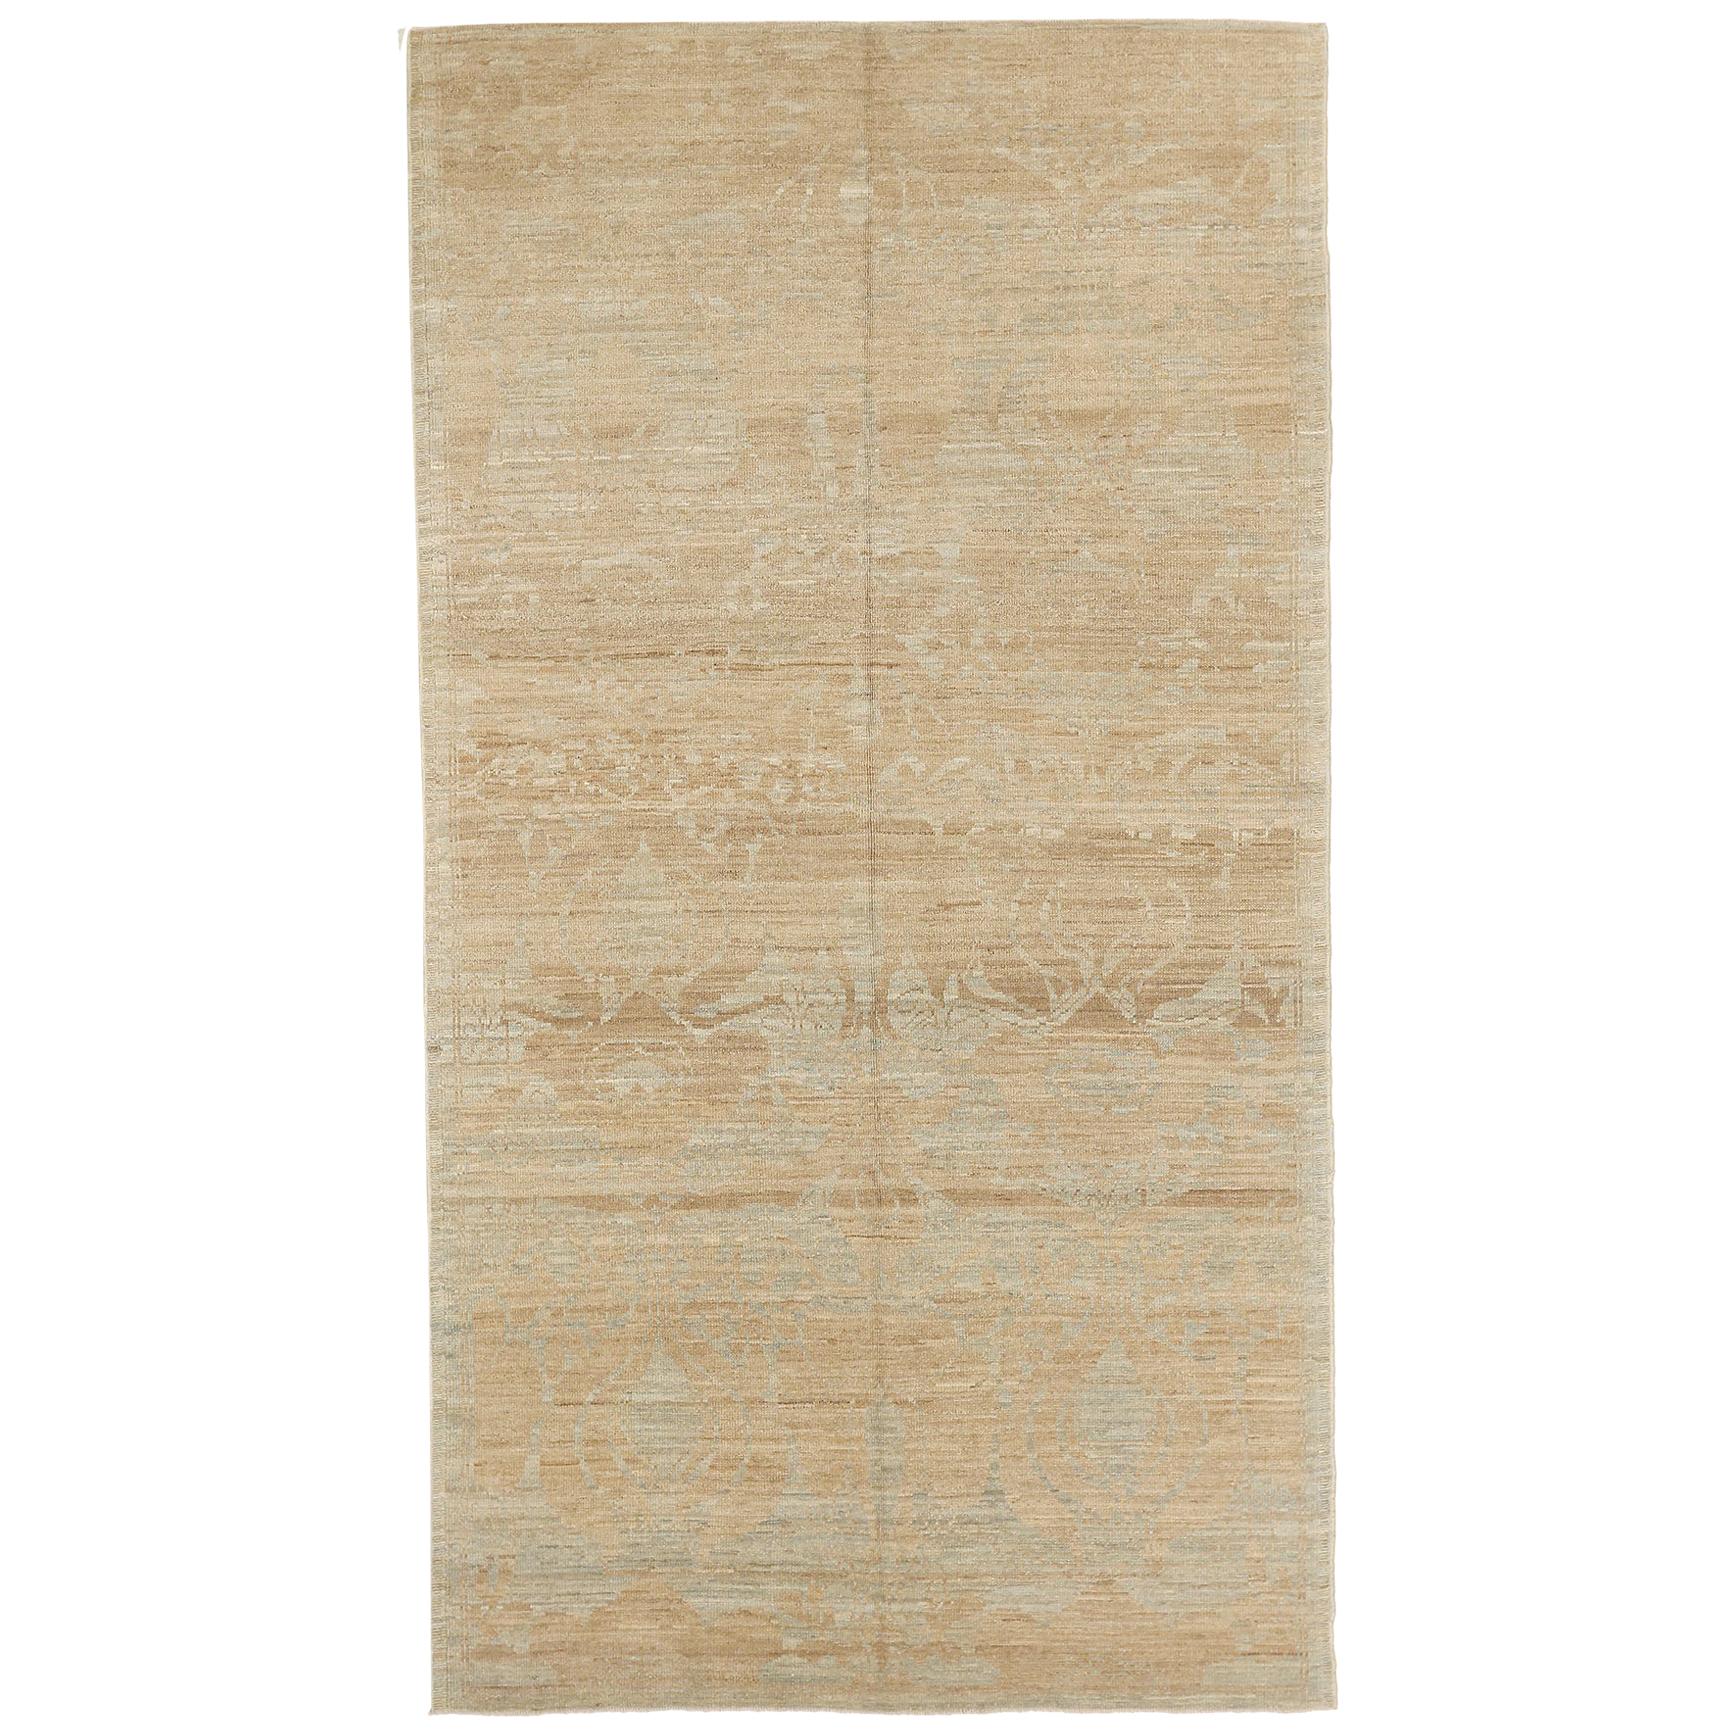 New Turkish Oushak Rug with Brown & Gray Floral Field For Sale